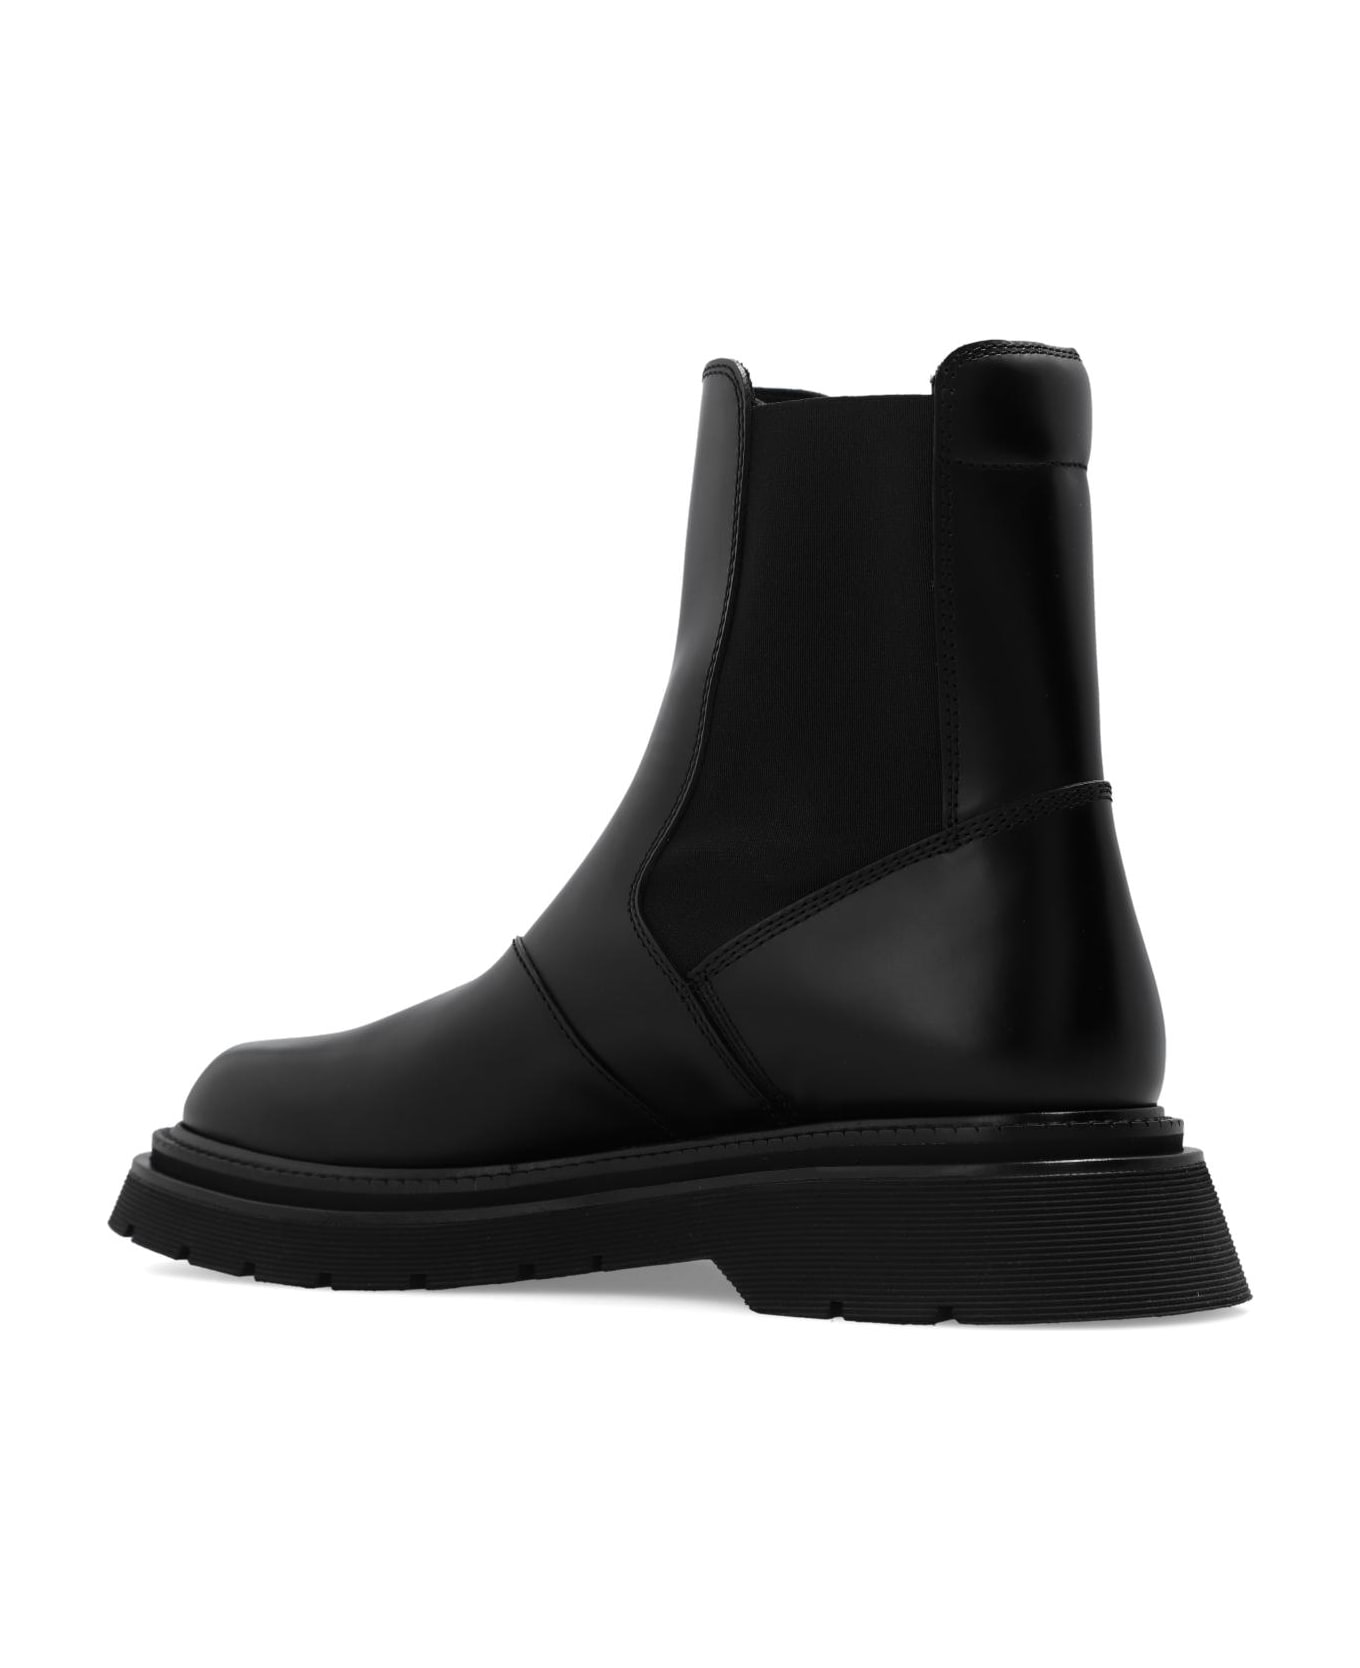 Dsquared2 Leather Chelsea Boots - black ブーツ